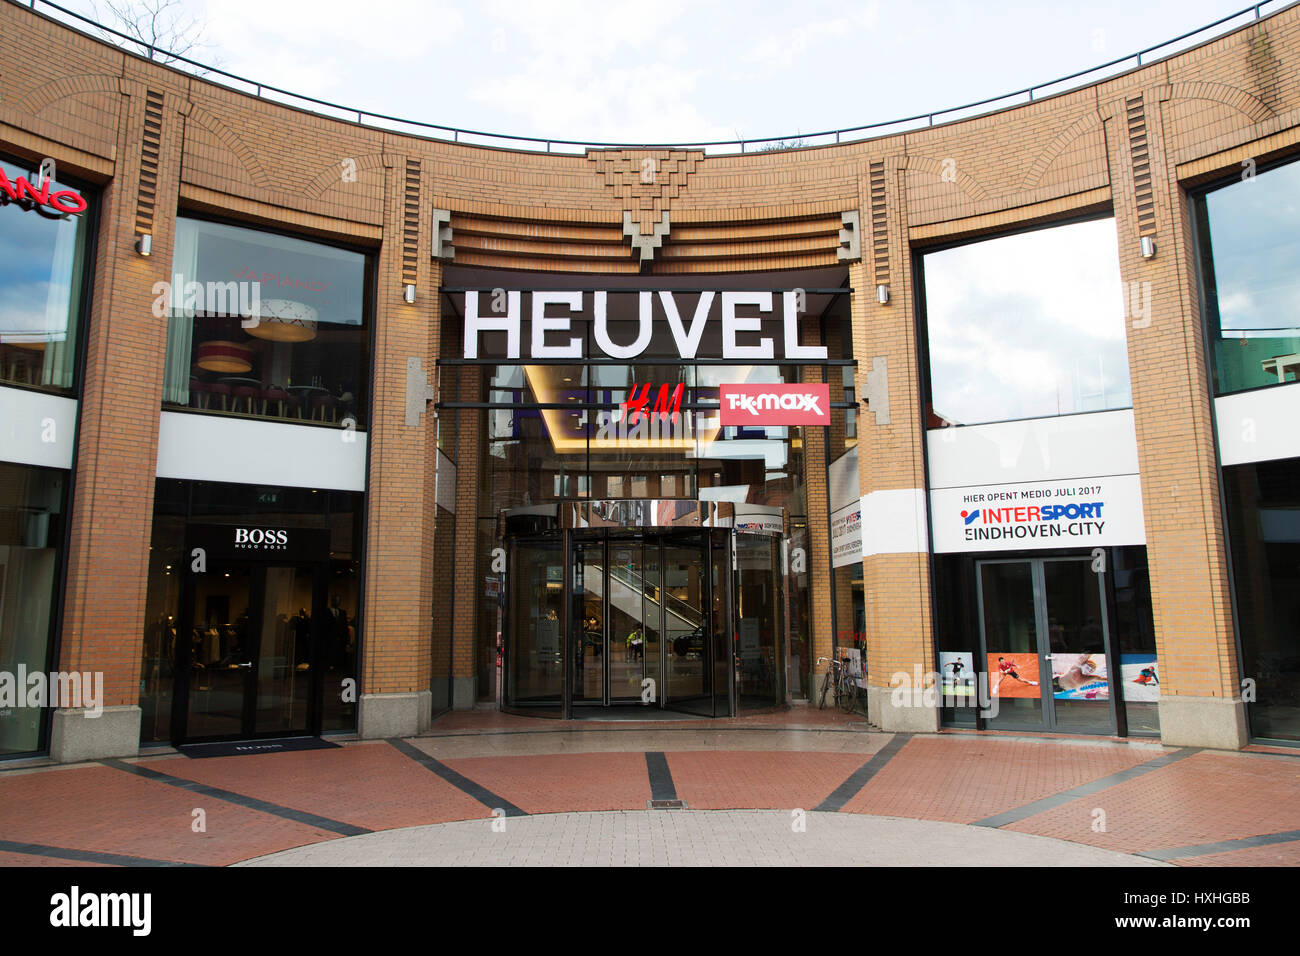 The Heuvel shopping mall in Eindhoven, the Netherlands. The city was long the headquarters of Philips and is evolving into a centre for design. Stock Photo